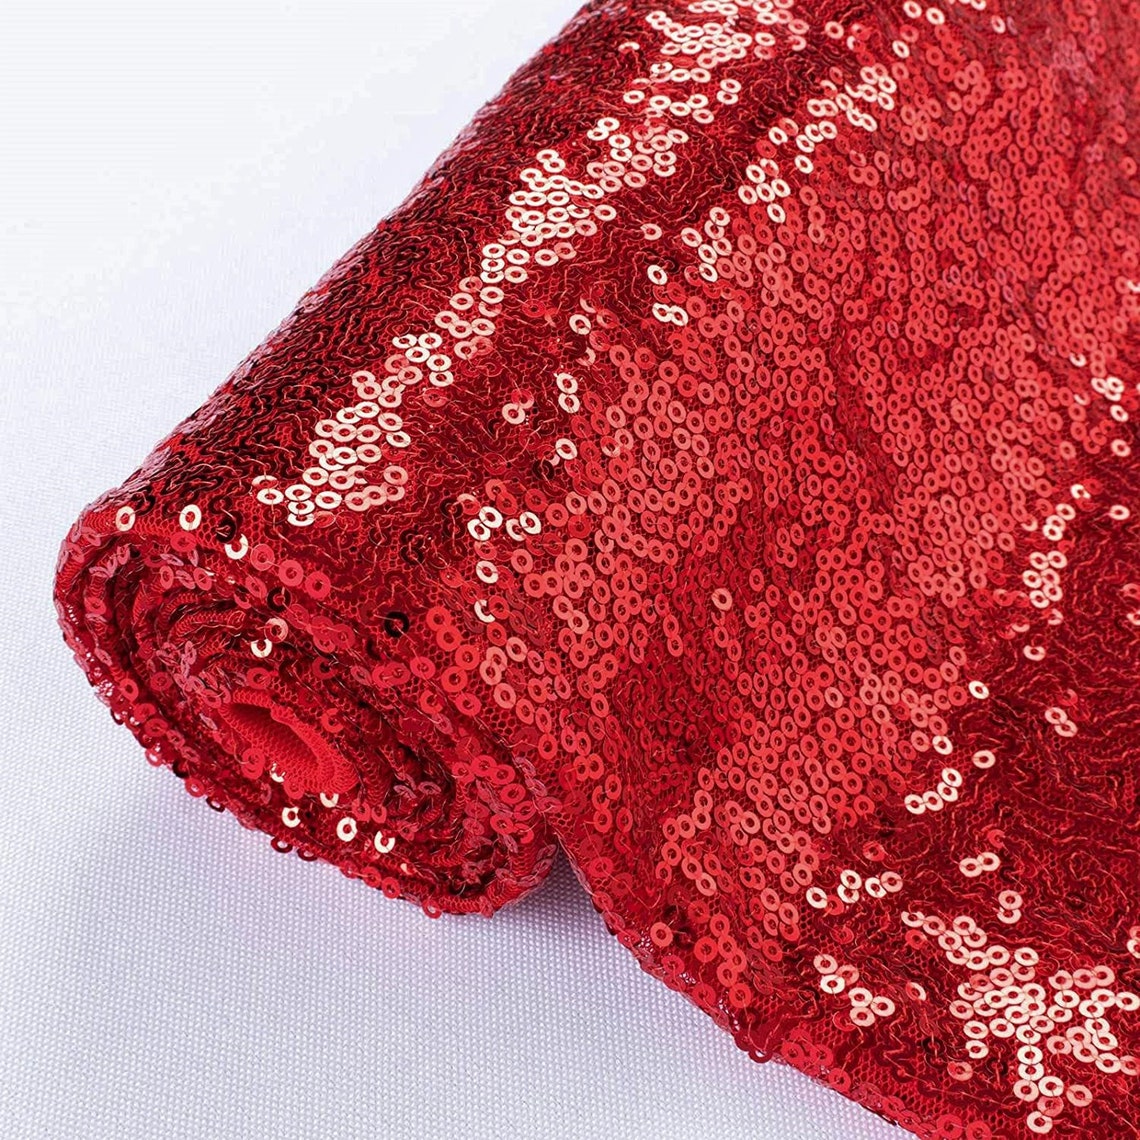 Red Sequin Fabric 58 Wide by the Yard Red 2 Way Stretch - Etsy